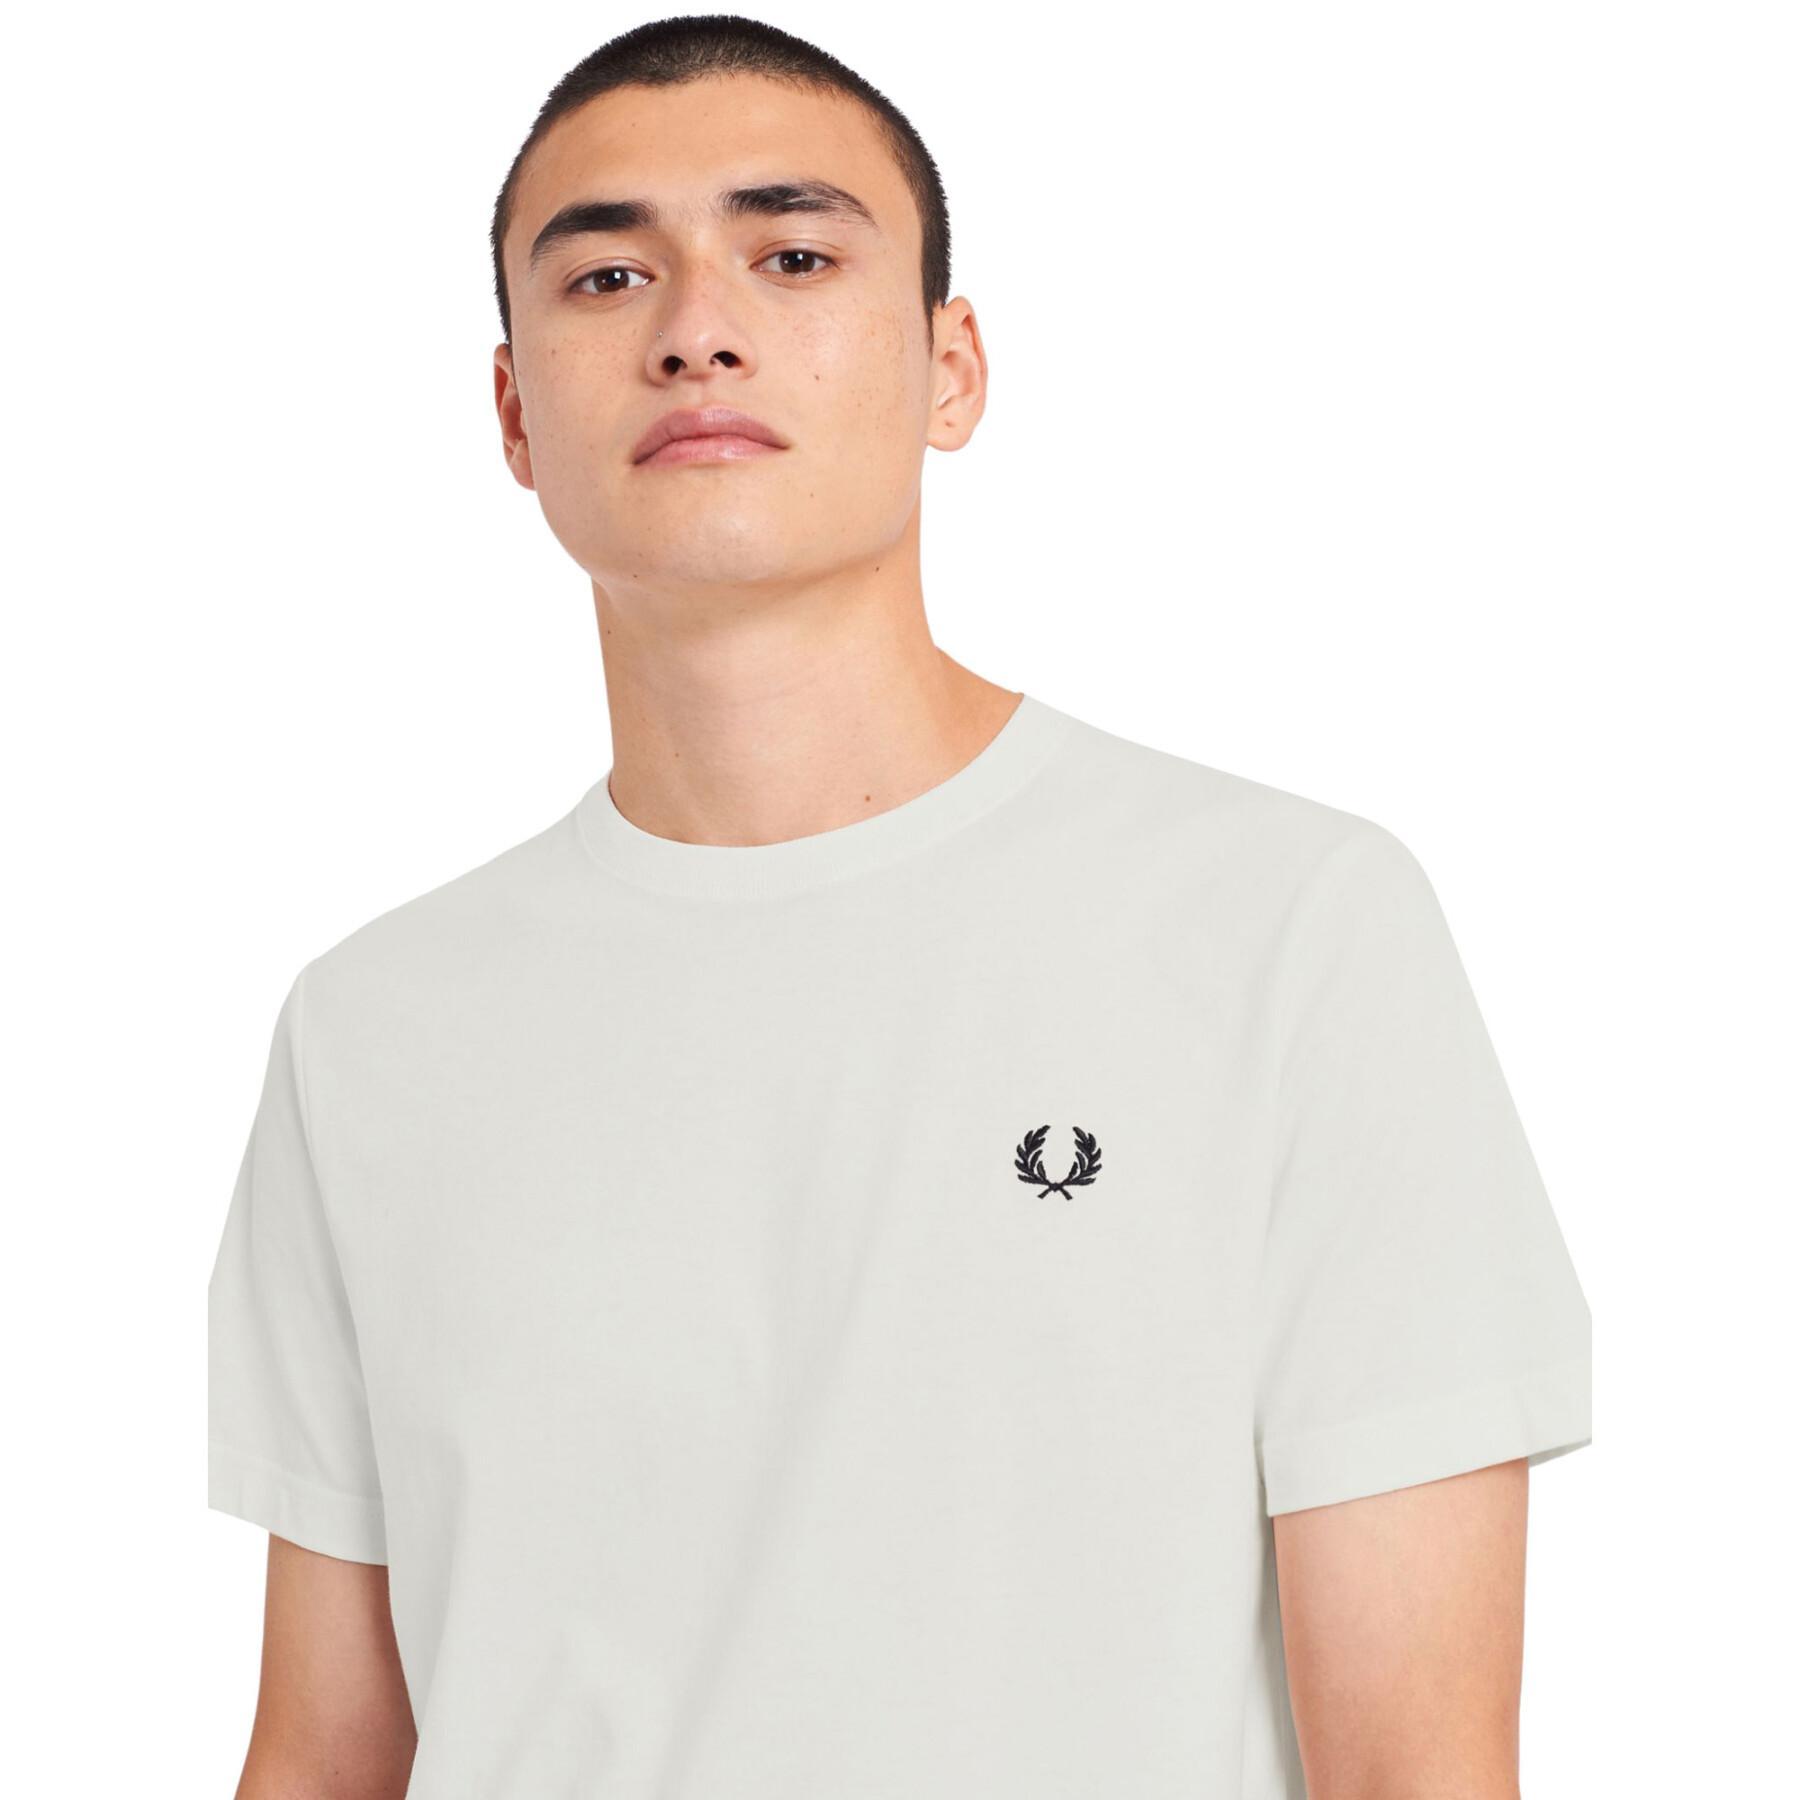 T-shirt med rund halsringning Fred Perry